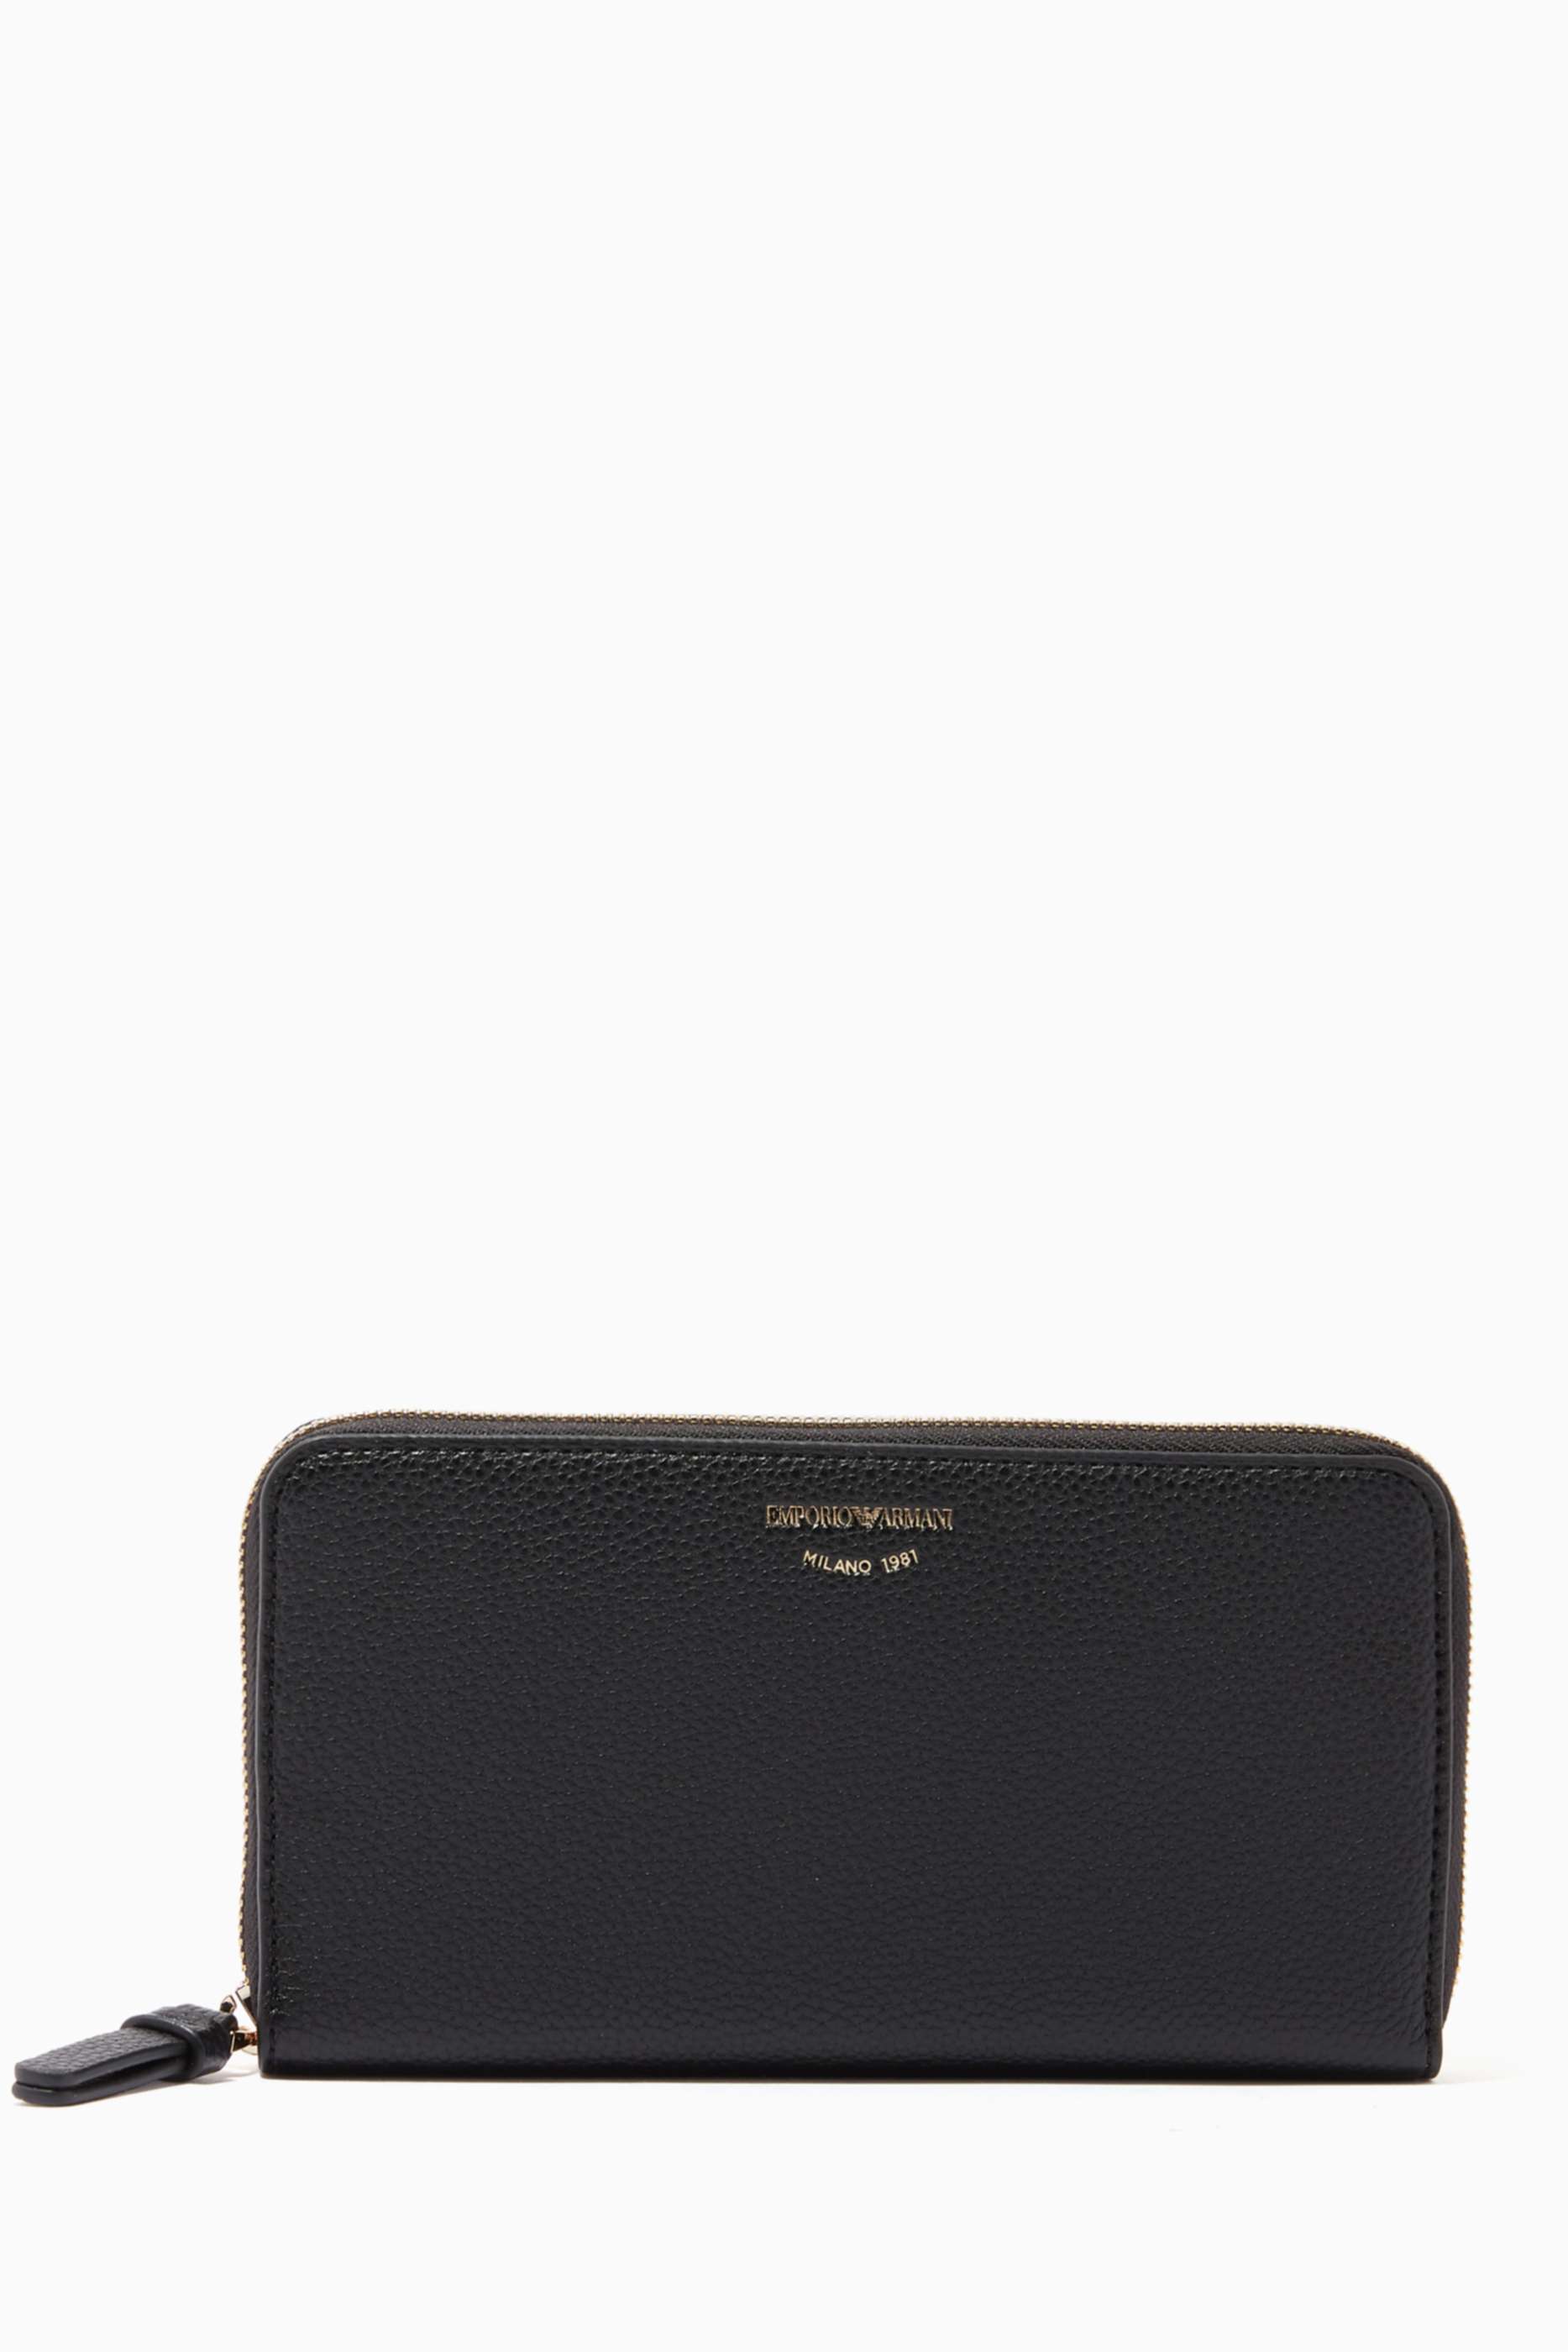 shop-emporio-armani-zip-around-grained-leather-wallet-for-women